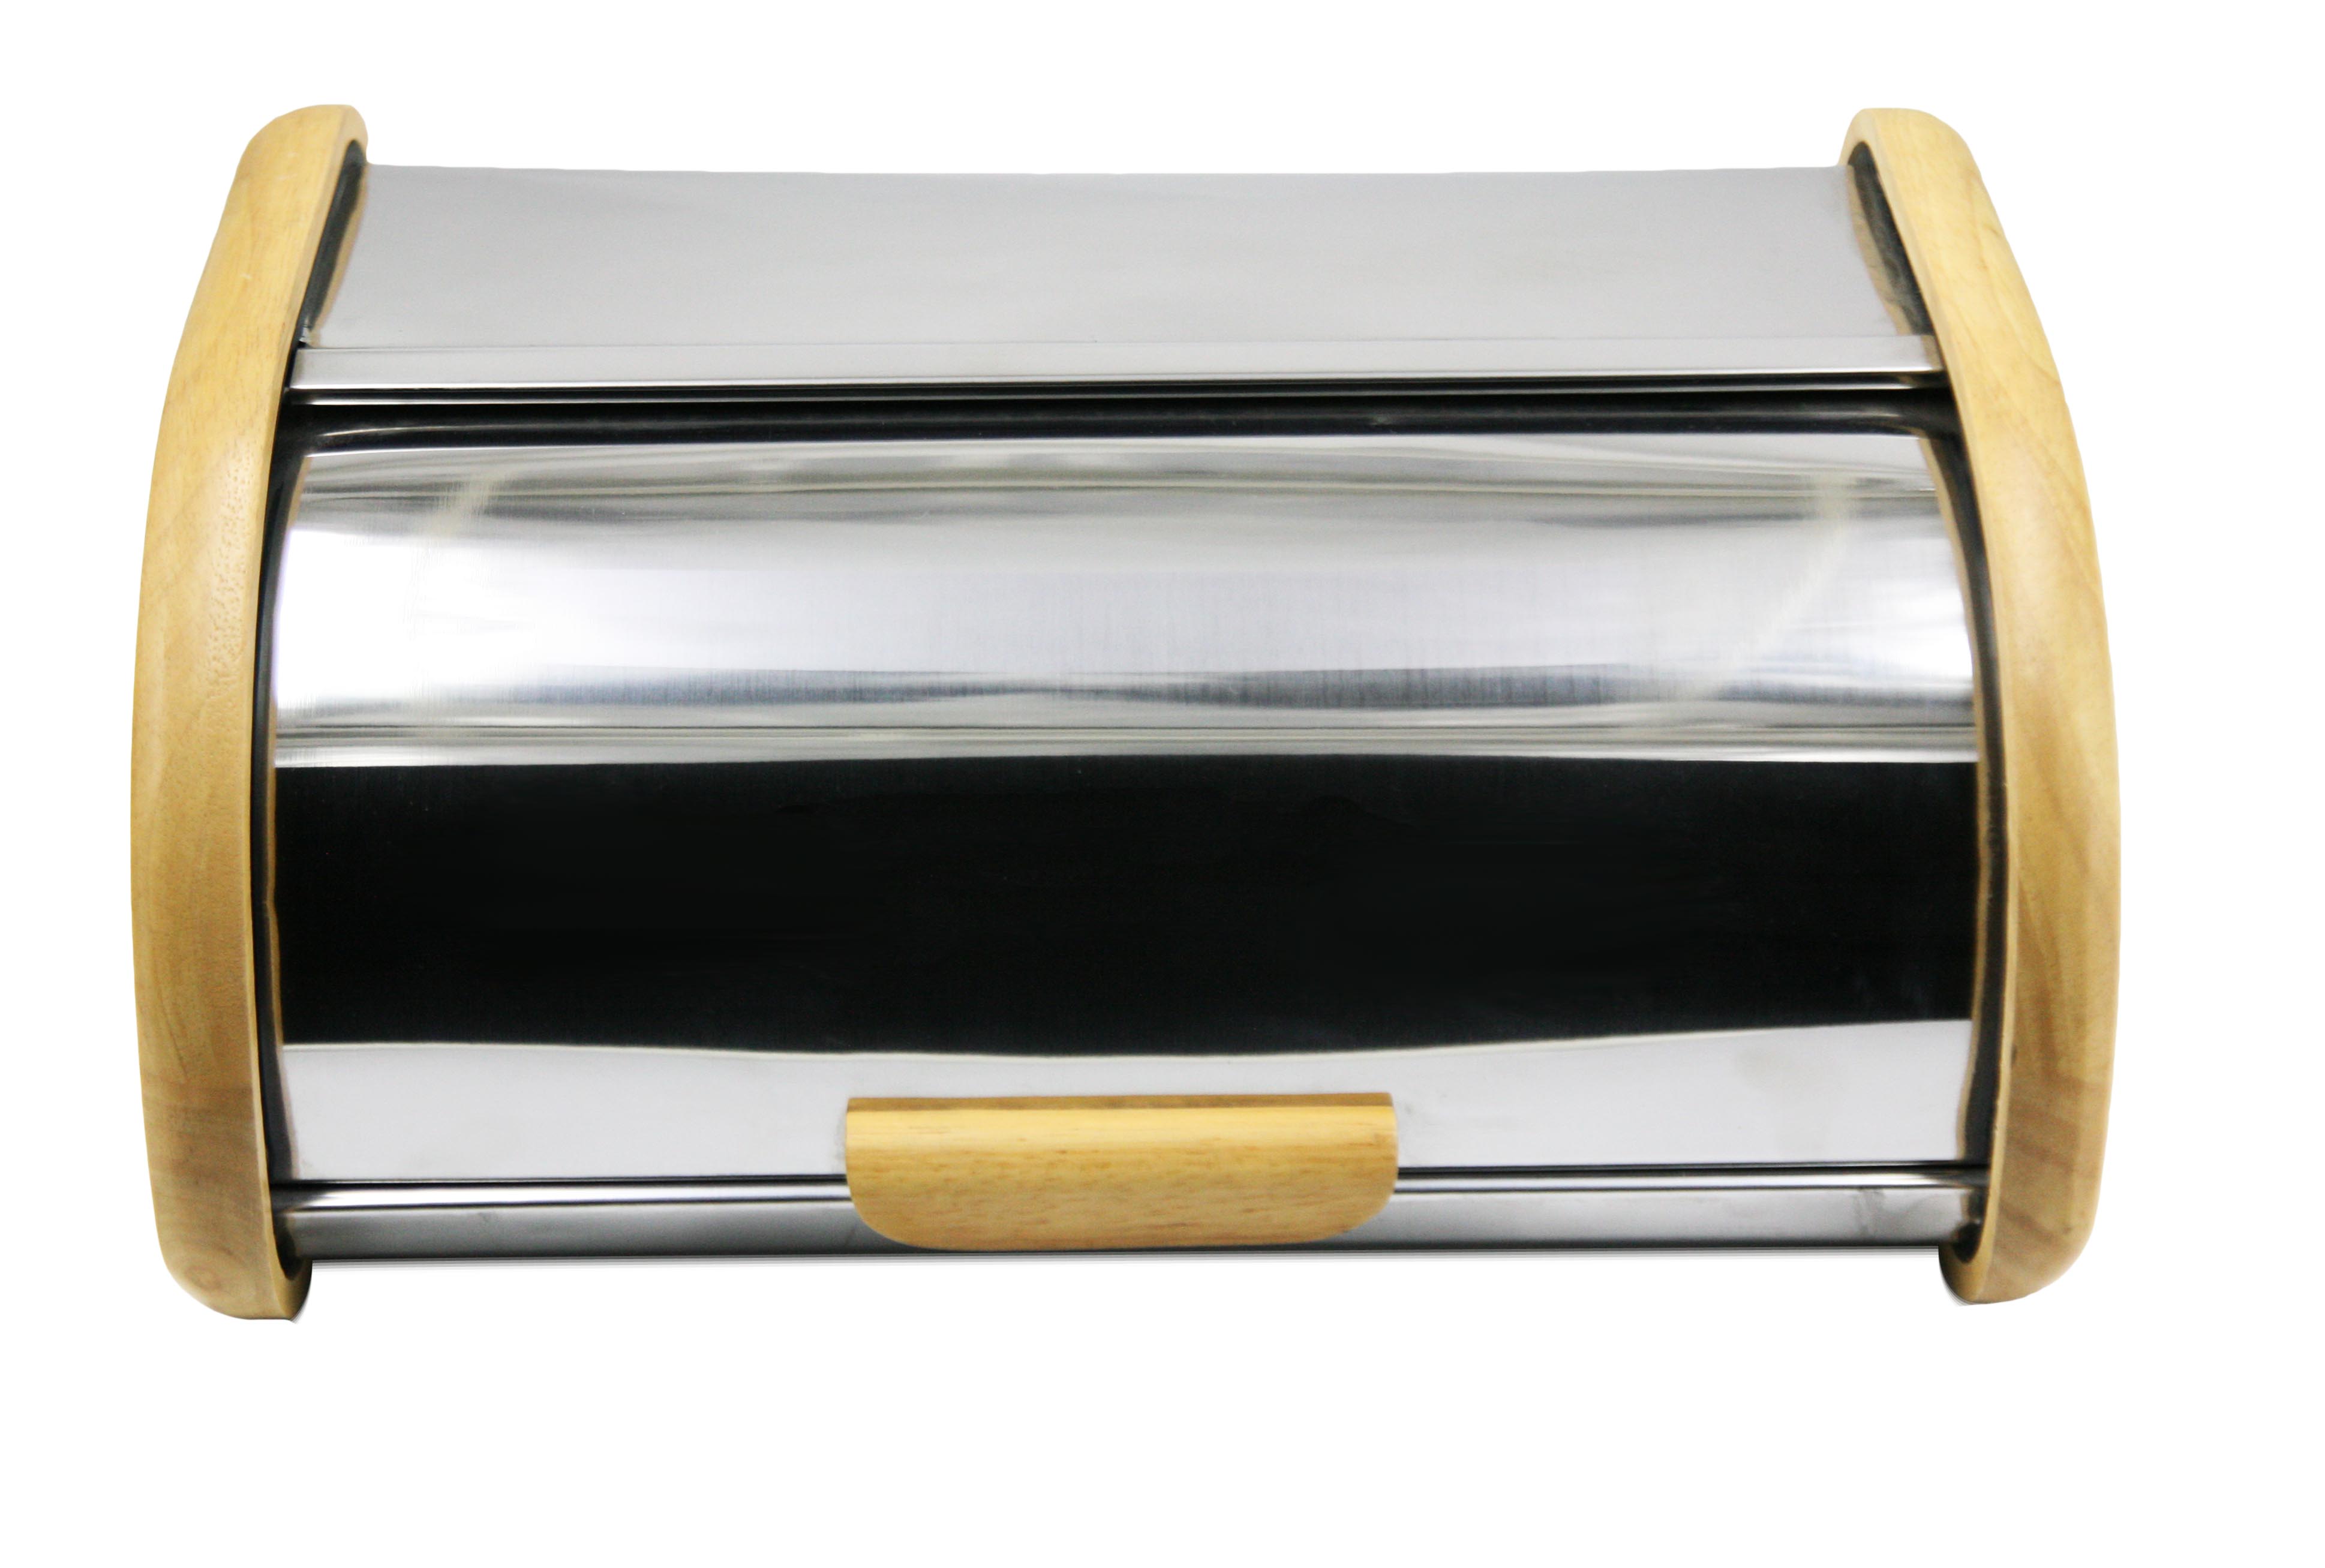 Stainless steel round bread bin with wooden sides Bread boxEB-OV-01